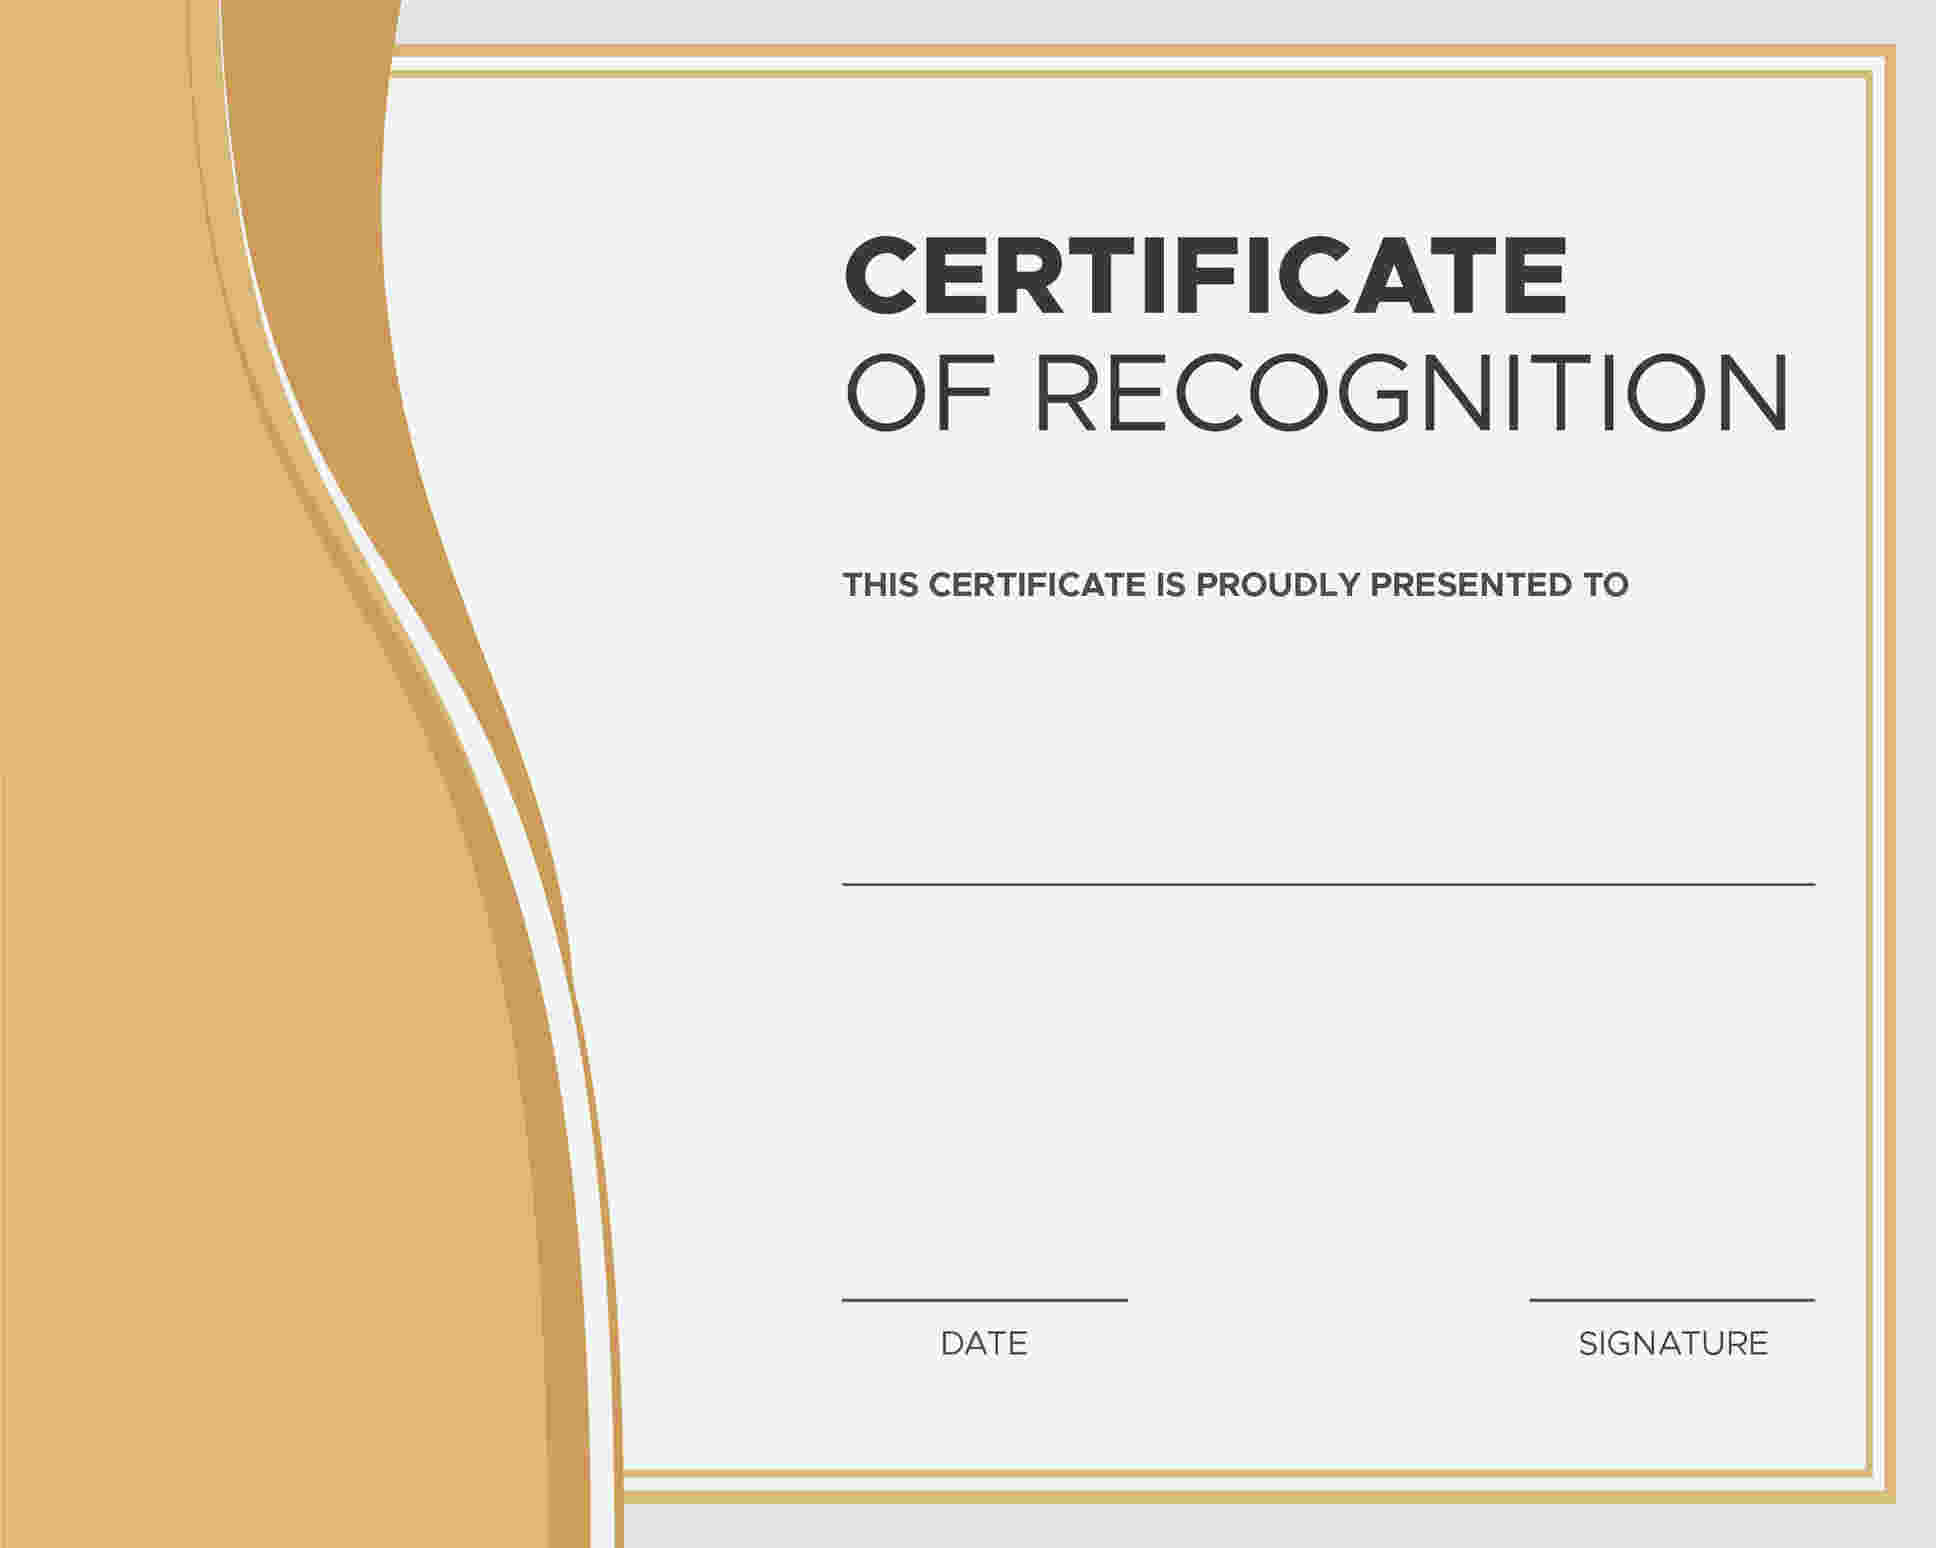 10 Amazing Award Certificate Templates in 10 - Recognize With Regard To Best Employee Award Certificate Templates